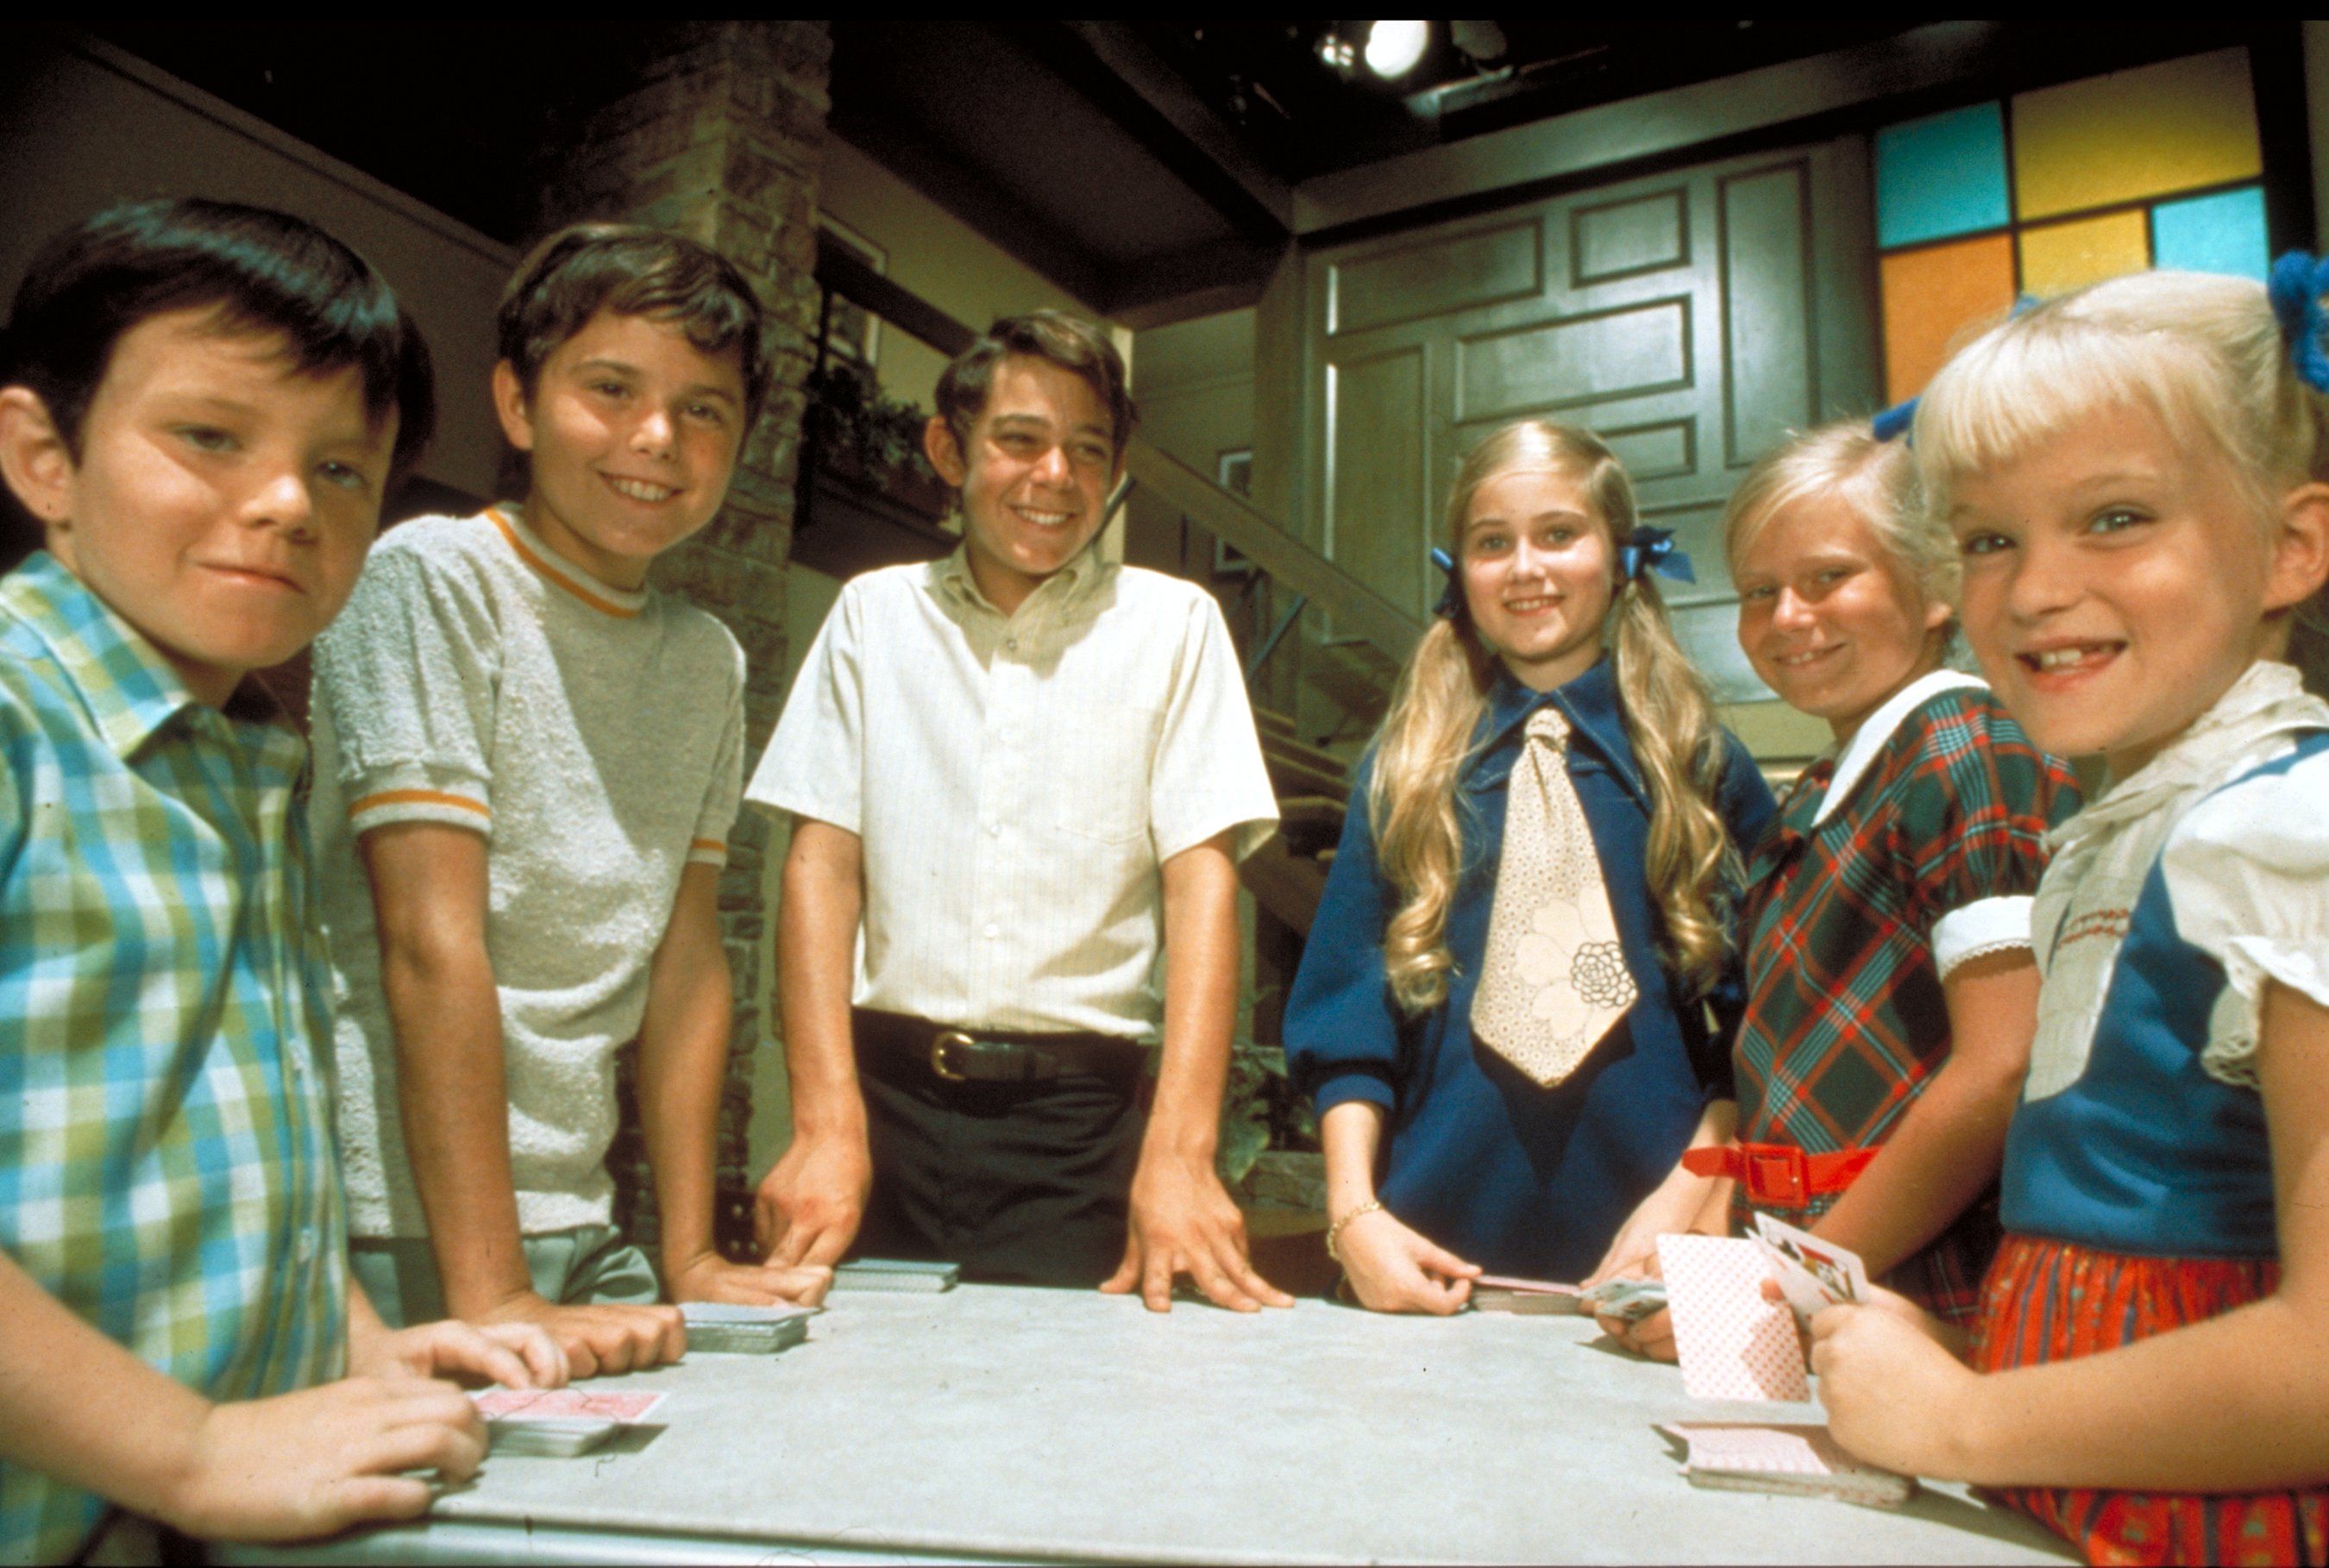 The Brady Bunch' Cast - Then and Now